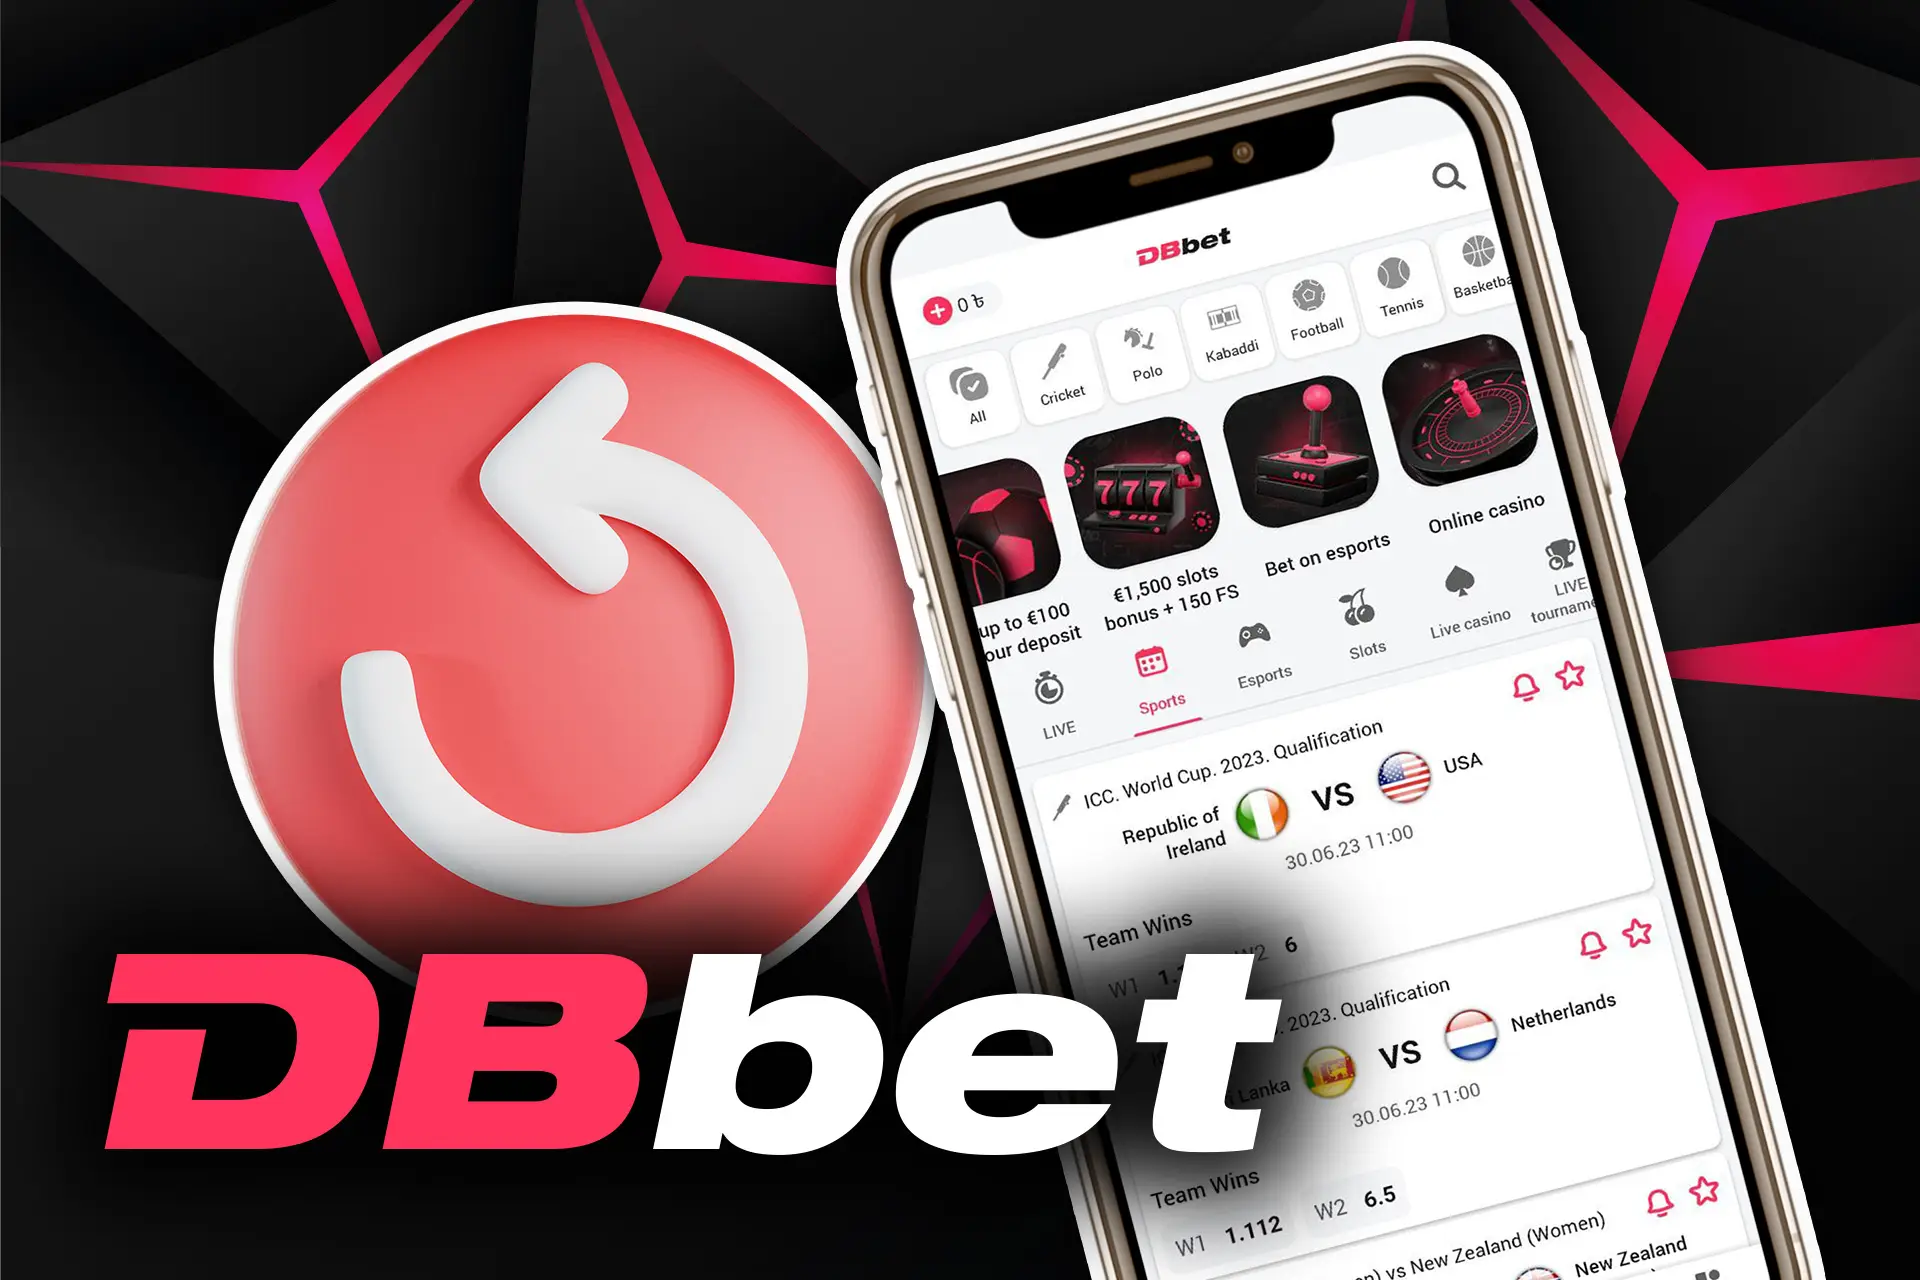 Don't forget to update your DBbet app.